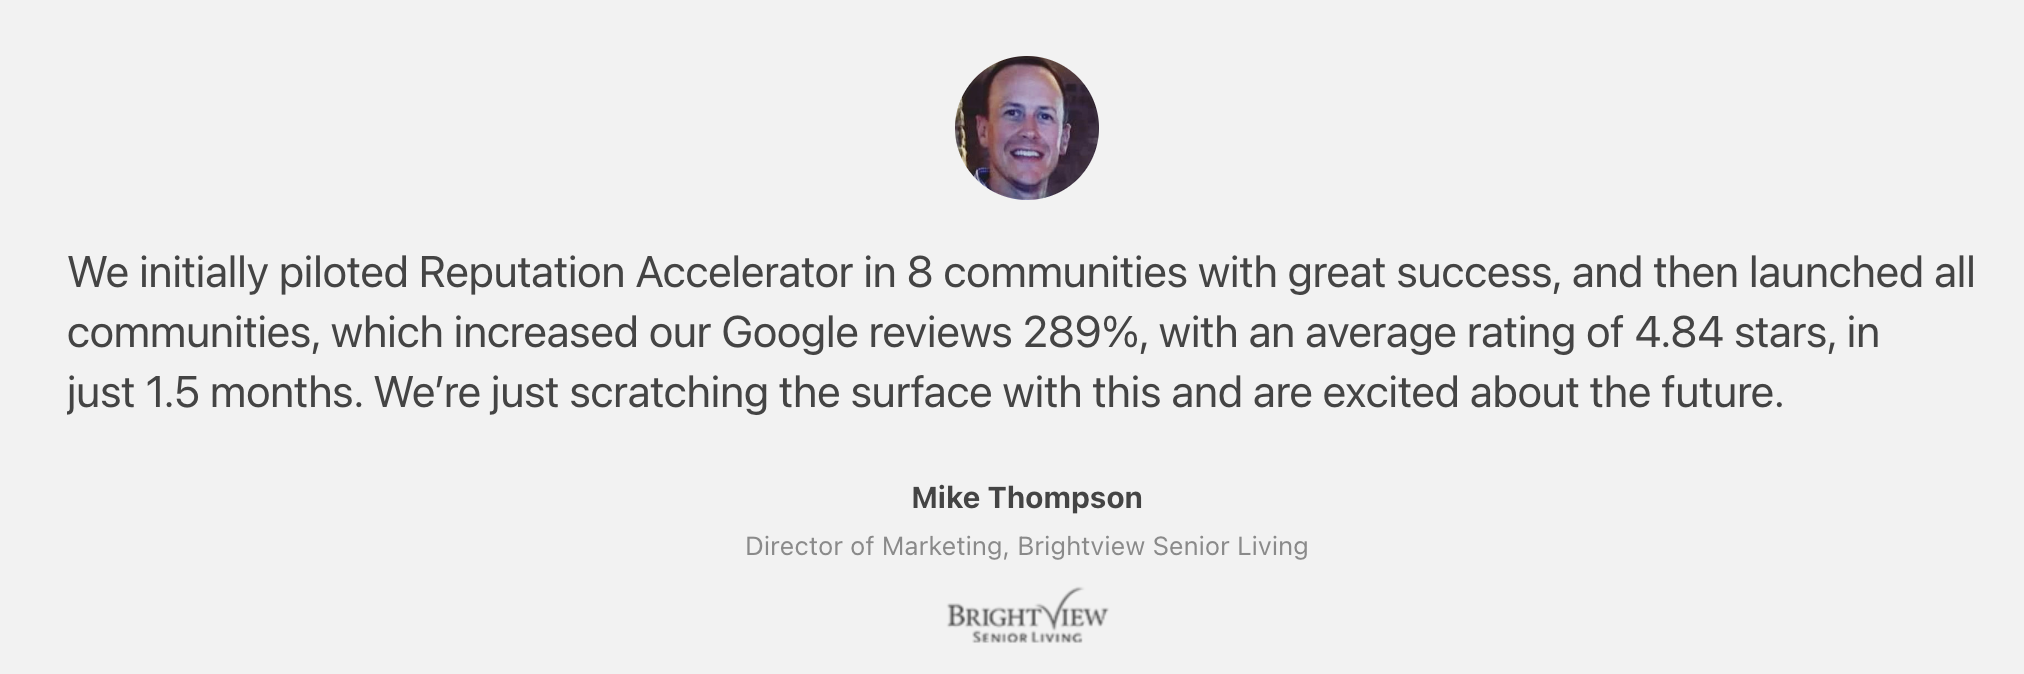 Reputation Accelerator Customer Quote: Mike Thompson, Director of Marketing, Brightview Senior Living: "We initially piloted Reputation Accelerator in 8 communities with great success, and then launched all communities, which increased our Google reviews 289%, with an average rating of 4.84 stars, in just 1.5 months. We’re just scratching the surface with this and are excited about the future.” ~Mike Thompson, Director of Marketing, Brightview Senior Living"